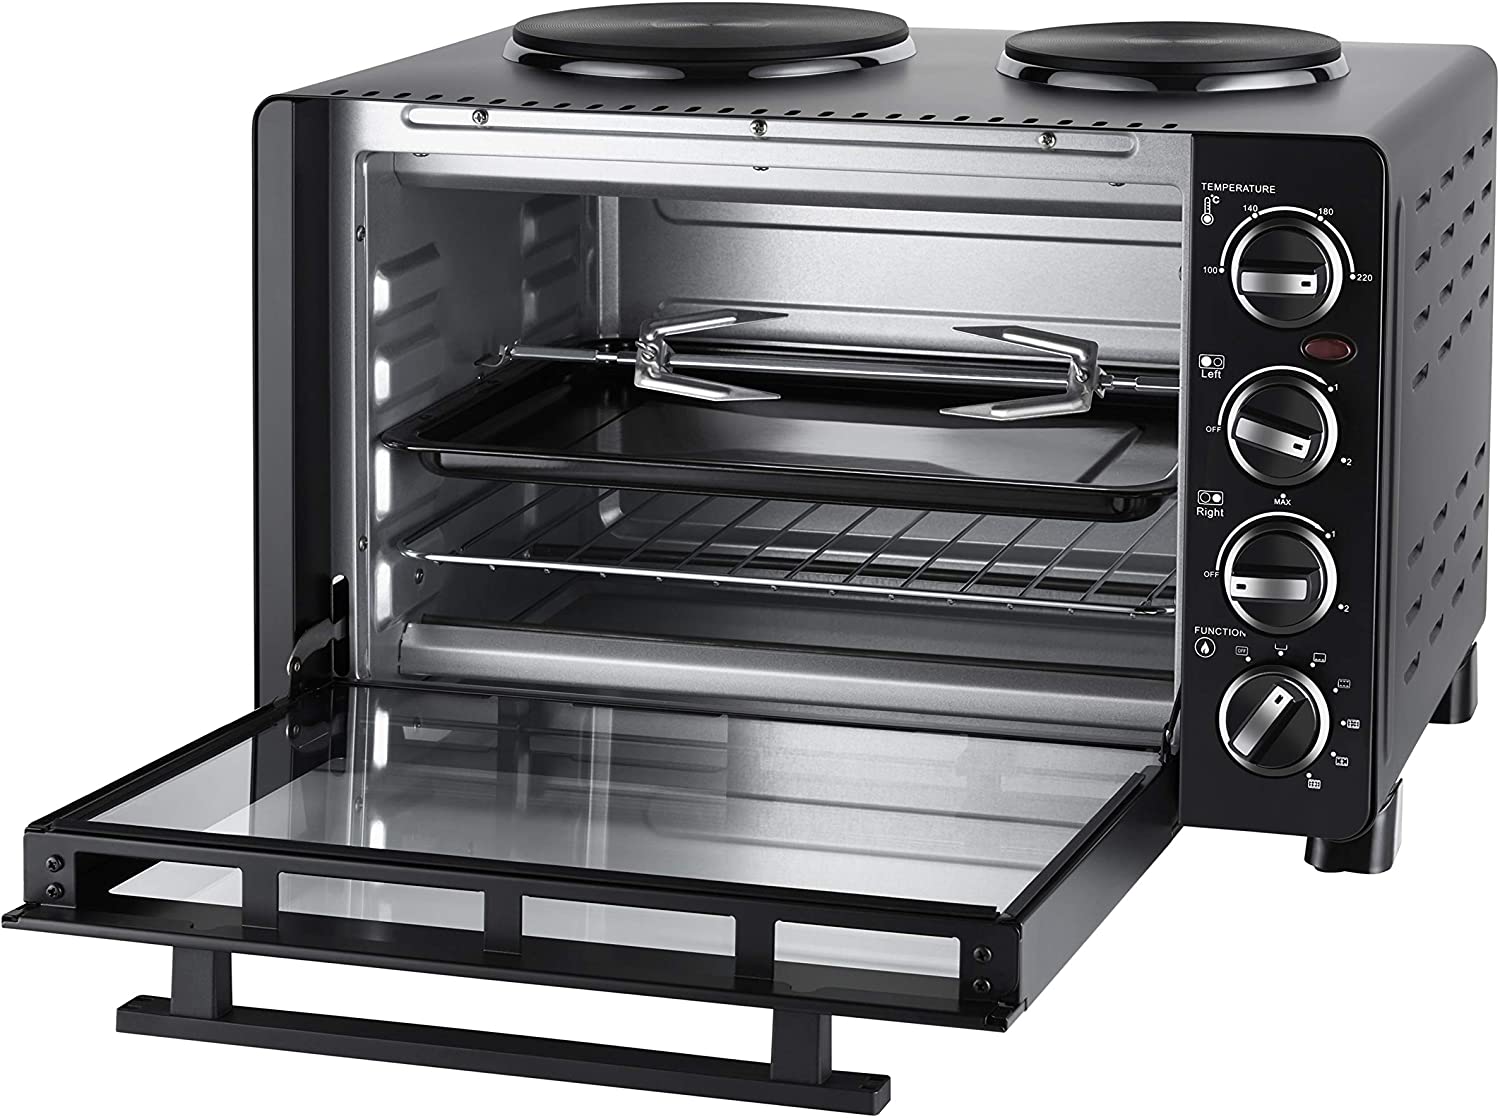 UNOLD 68885 Small Kitchen All in One 600-1,500 W, 30 L Volume, Baking Grill and Rotisserie Oven with 2 Hot Plates, Metal, Black